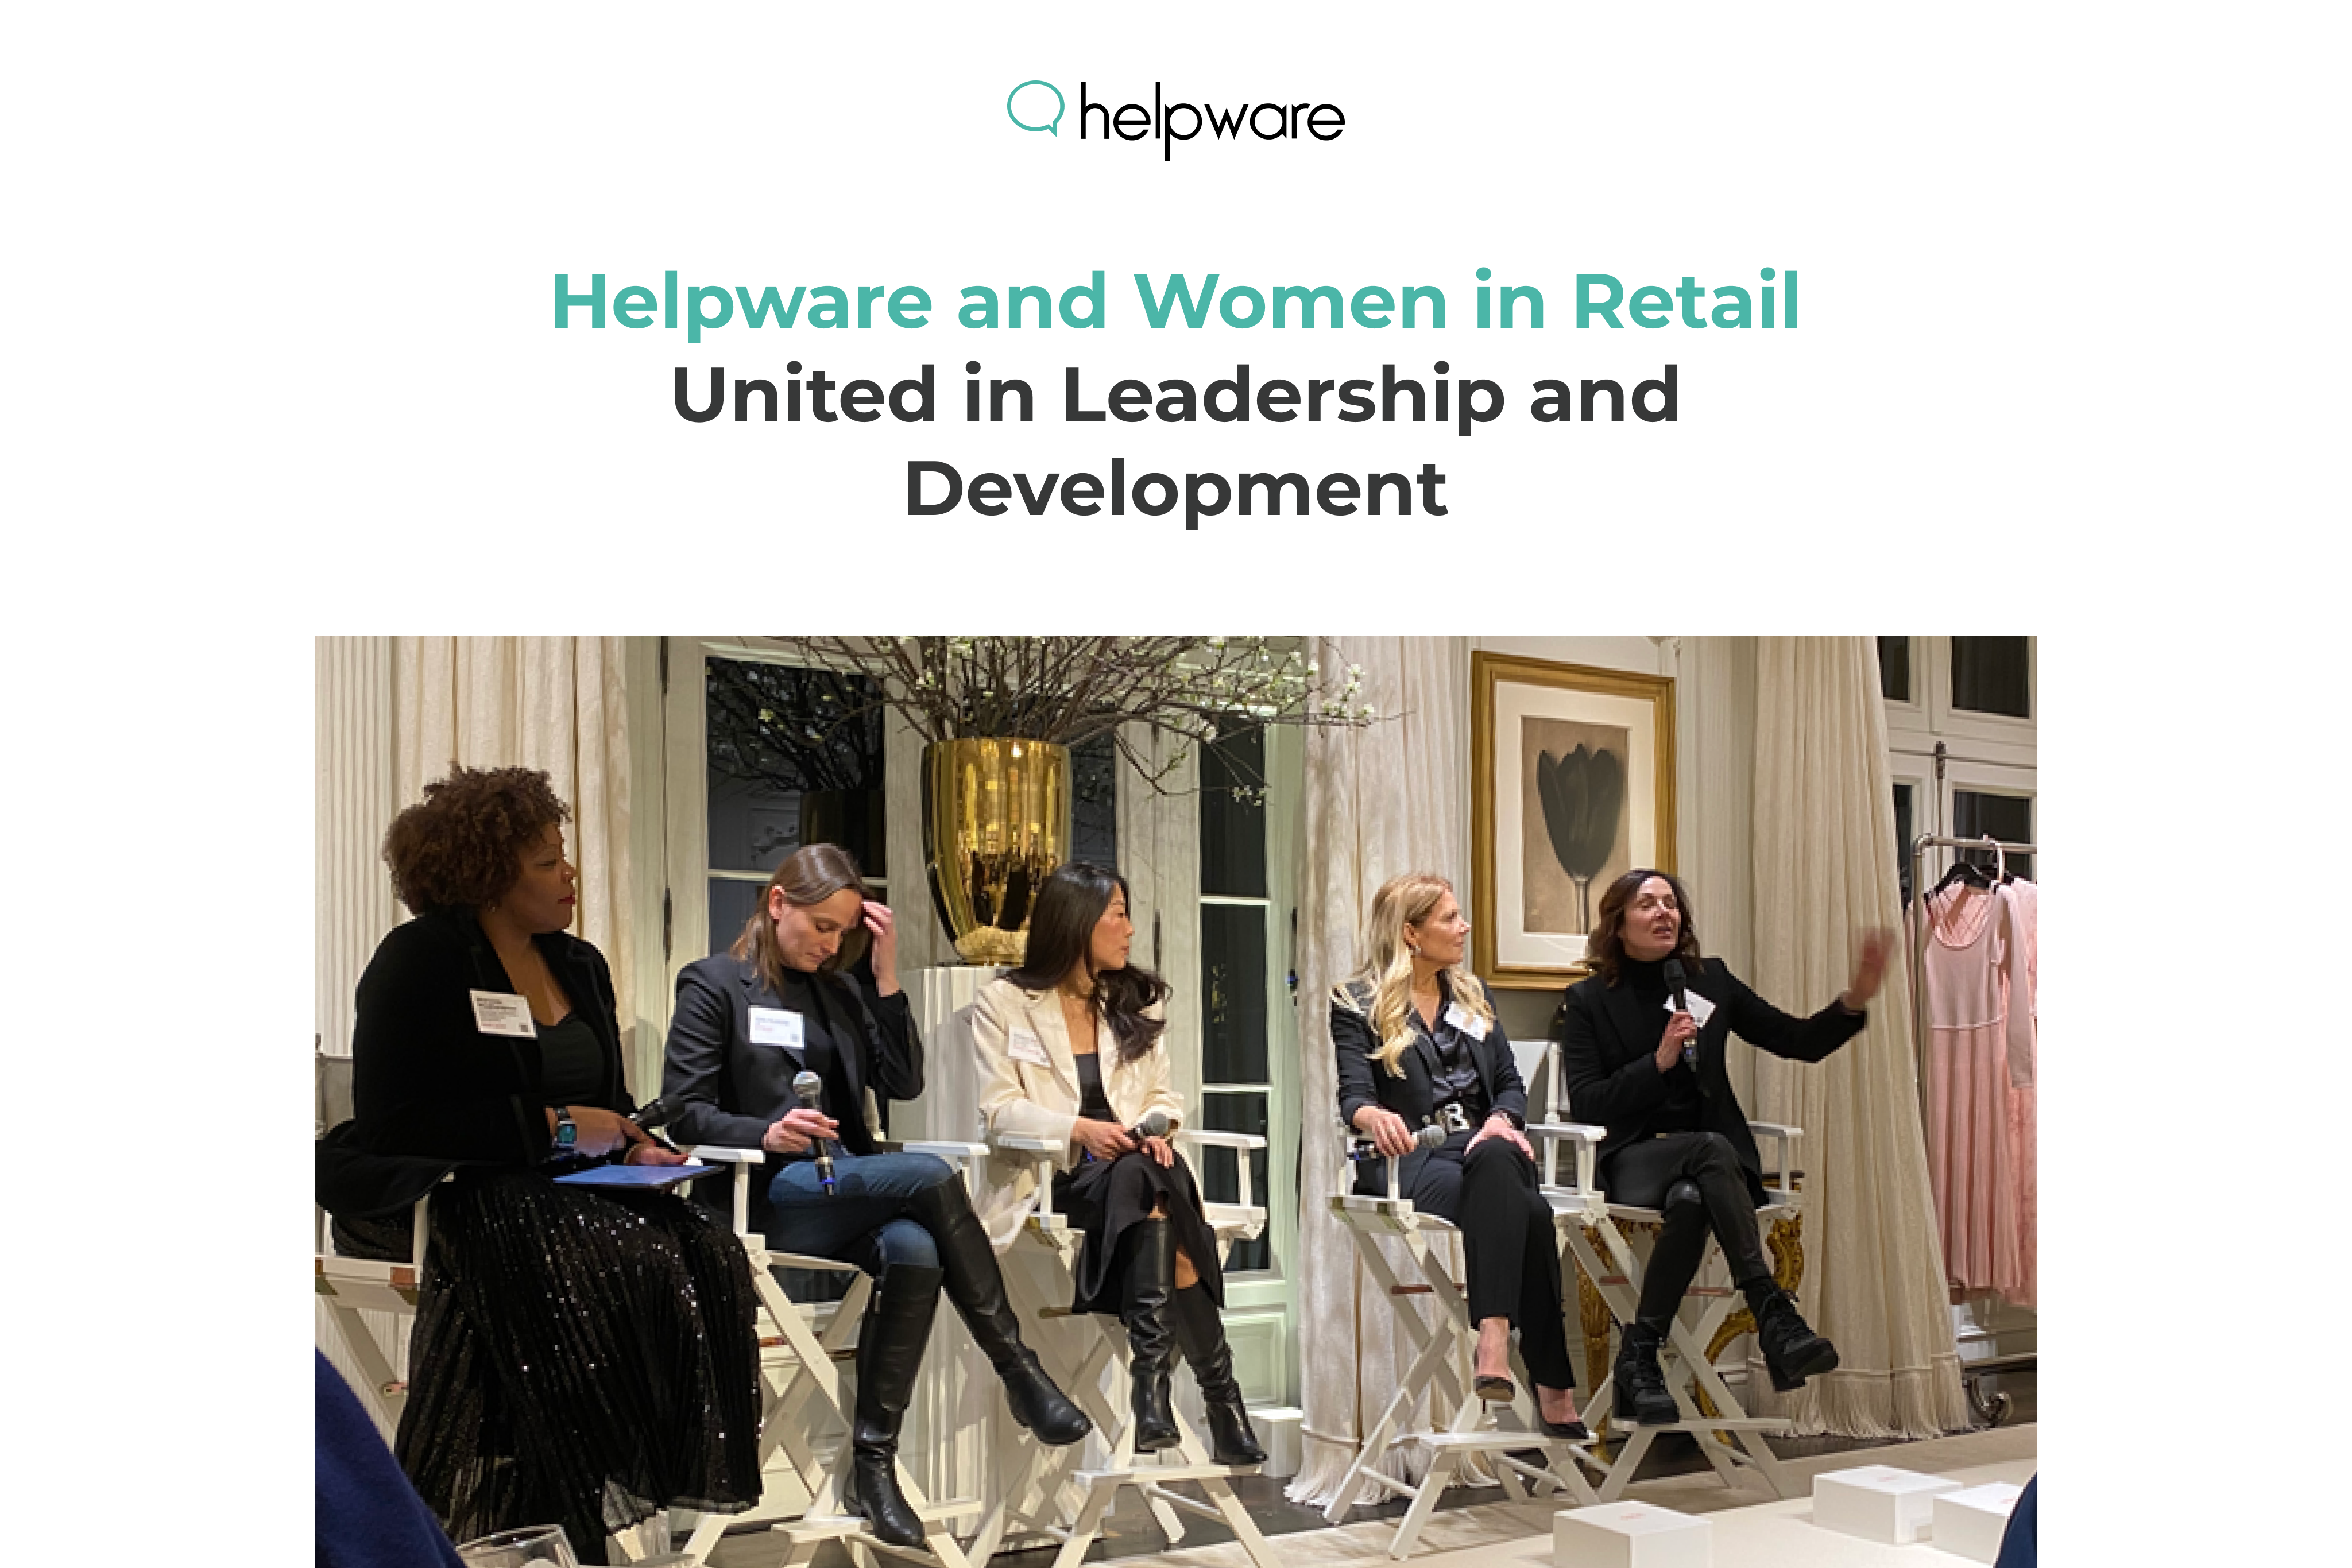 Helpware Executives Sponsor and Join Women in Retail Conference, Focusing on Female Leadership and Philanthropy